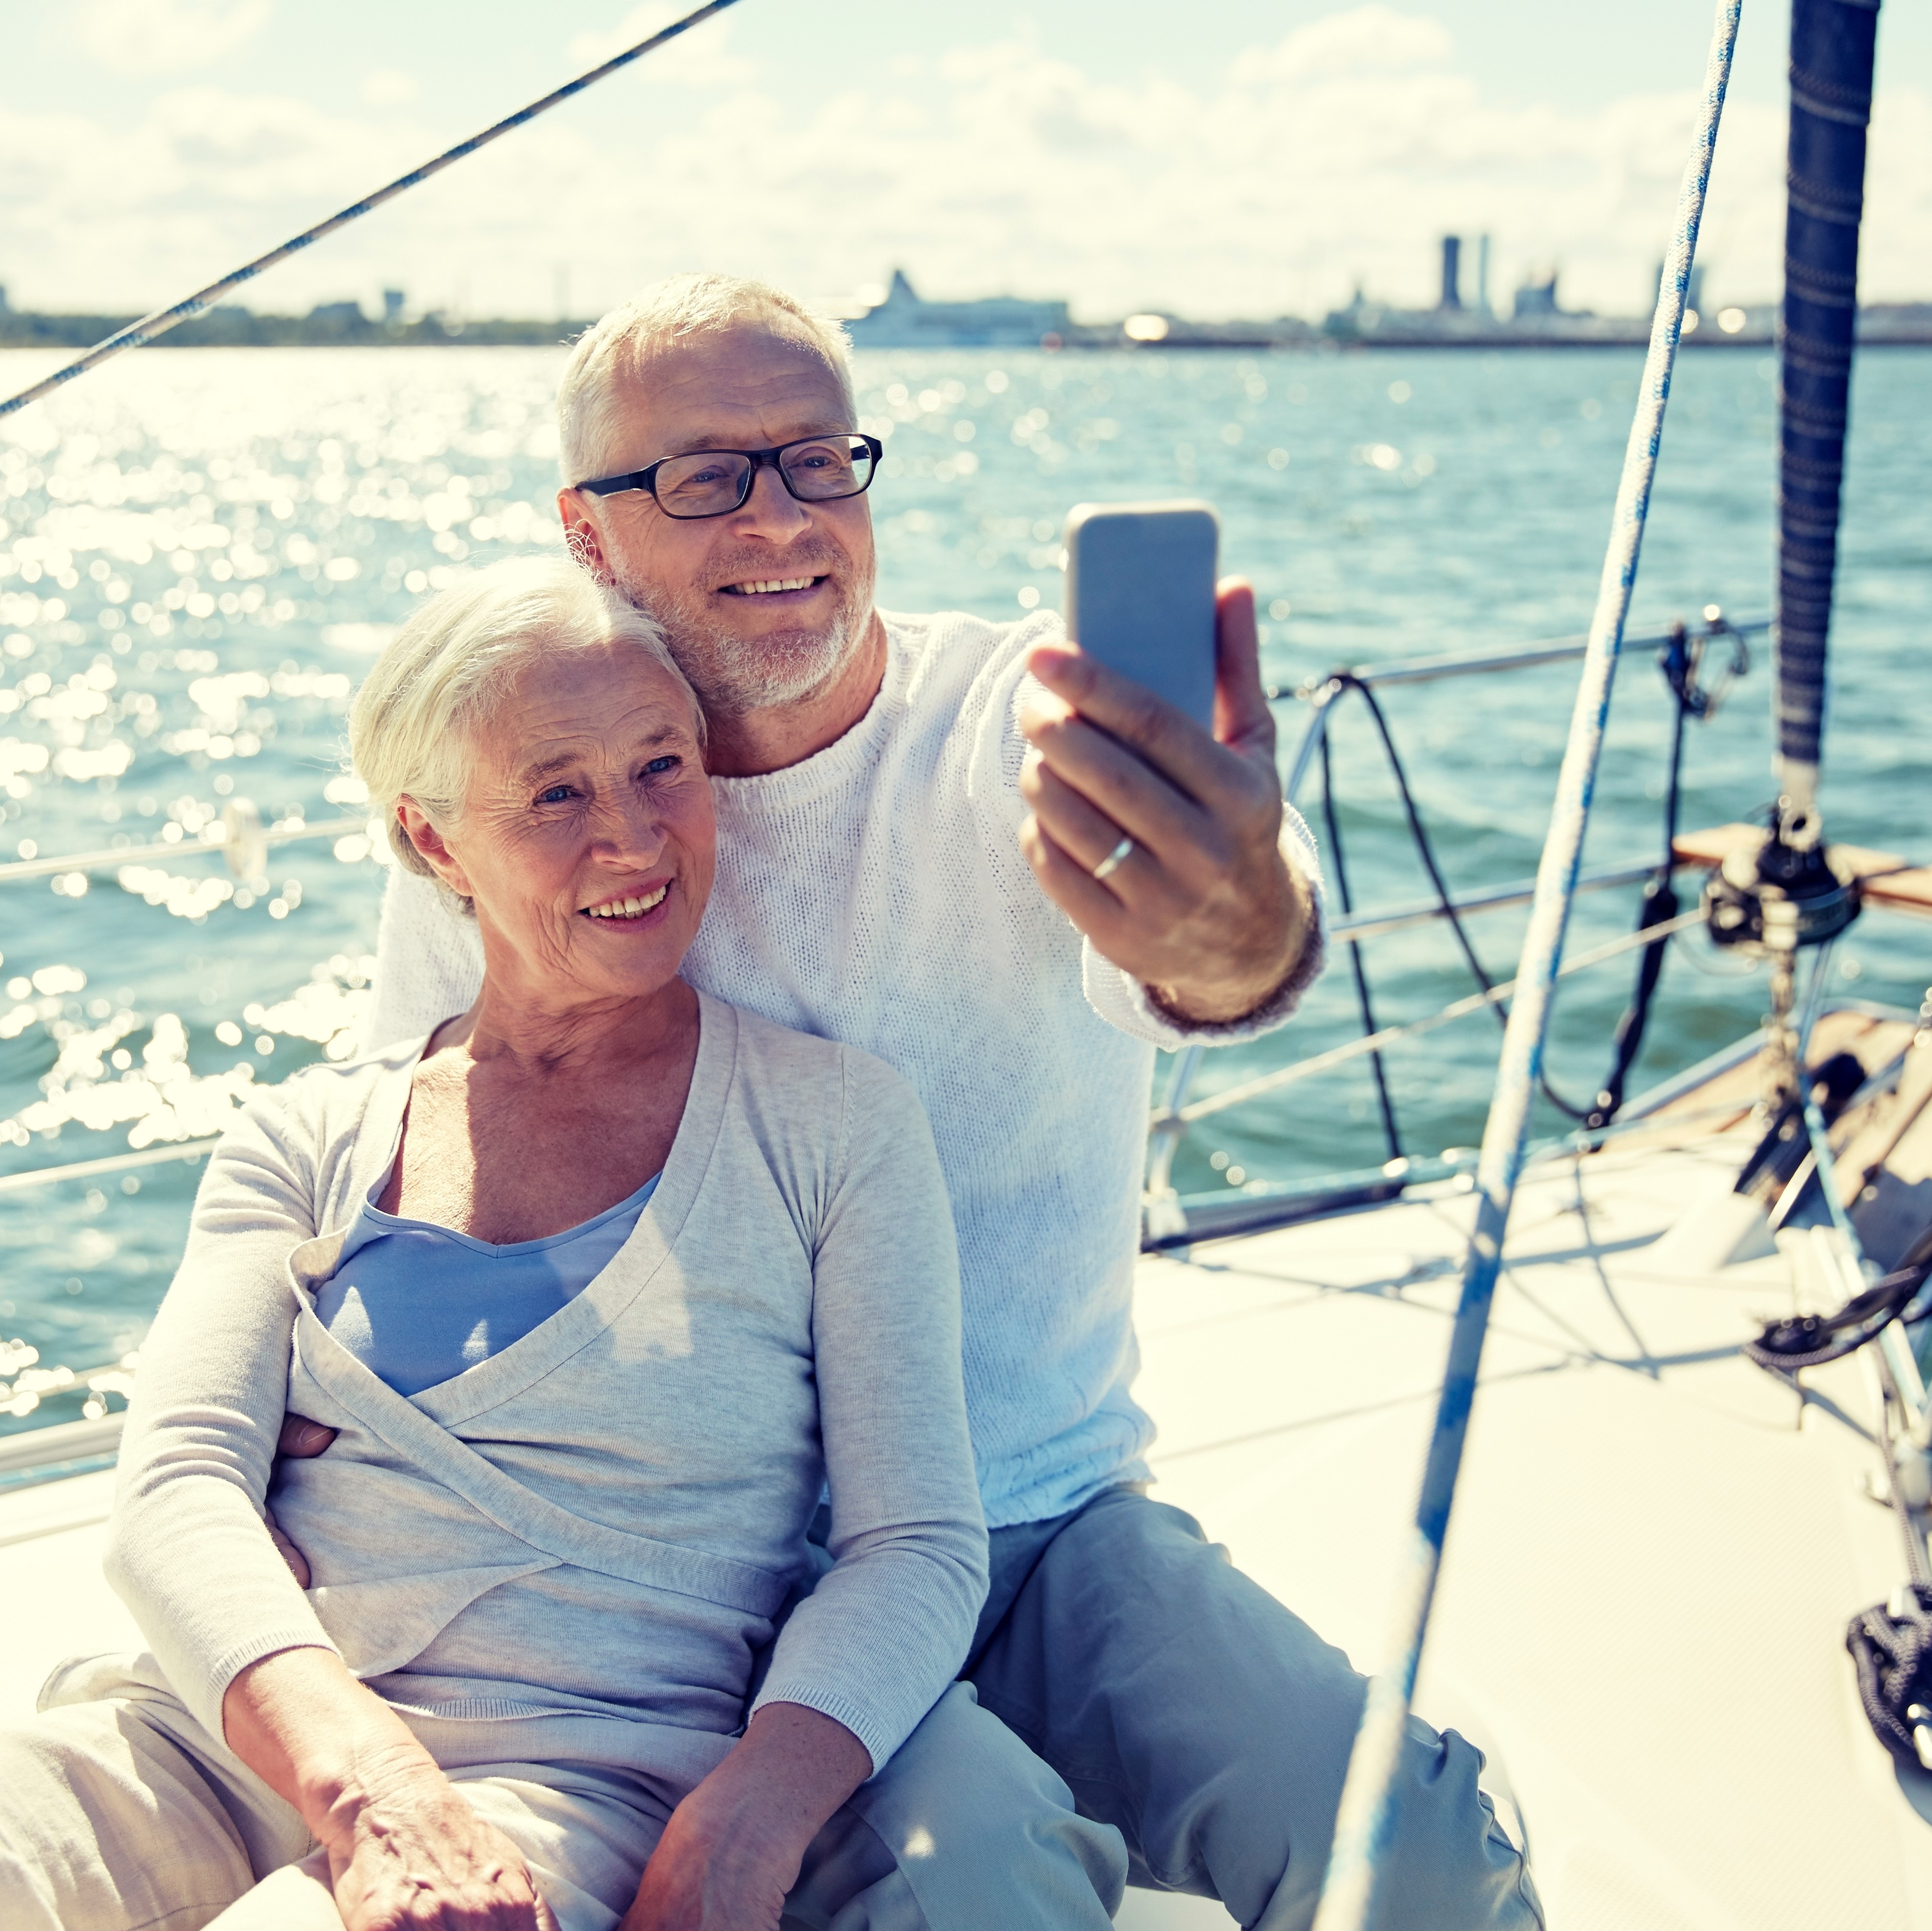 Retired couple on a boat, taking a selfie on the water with a skyline in the background